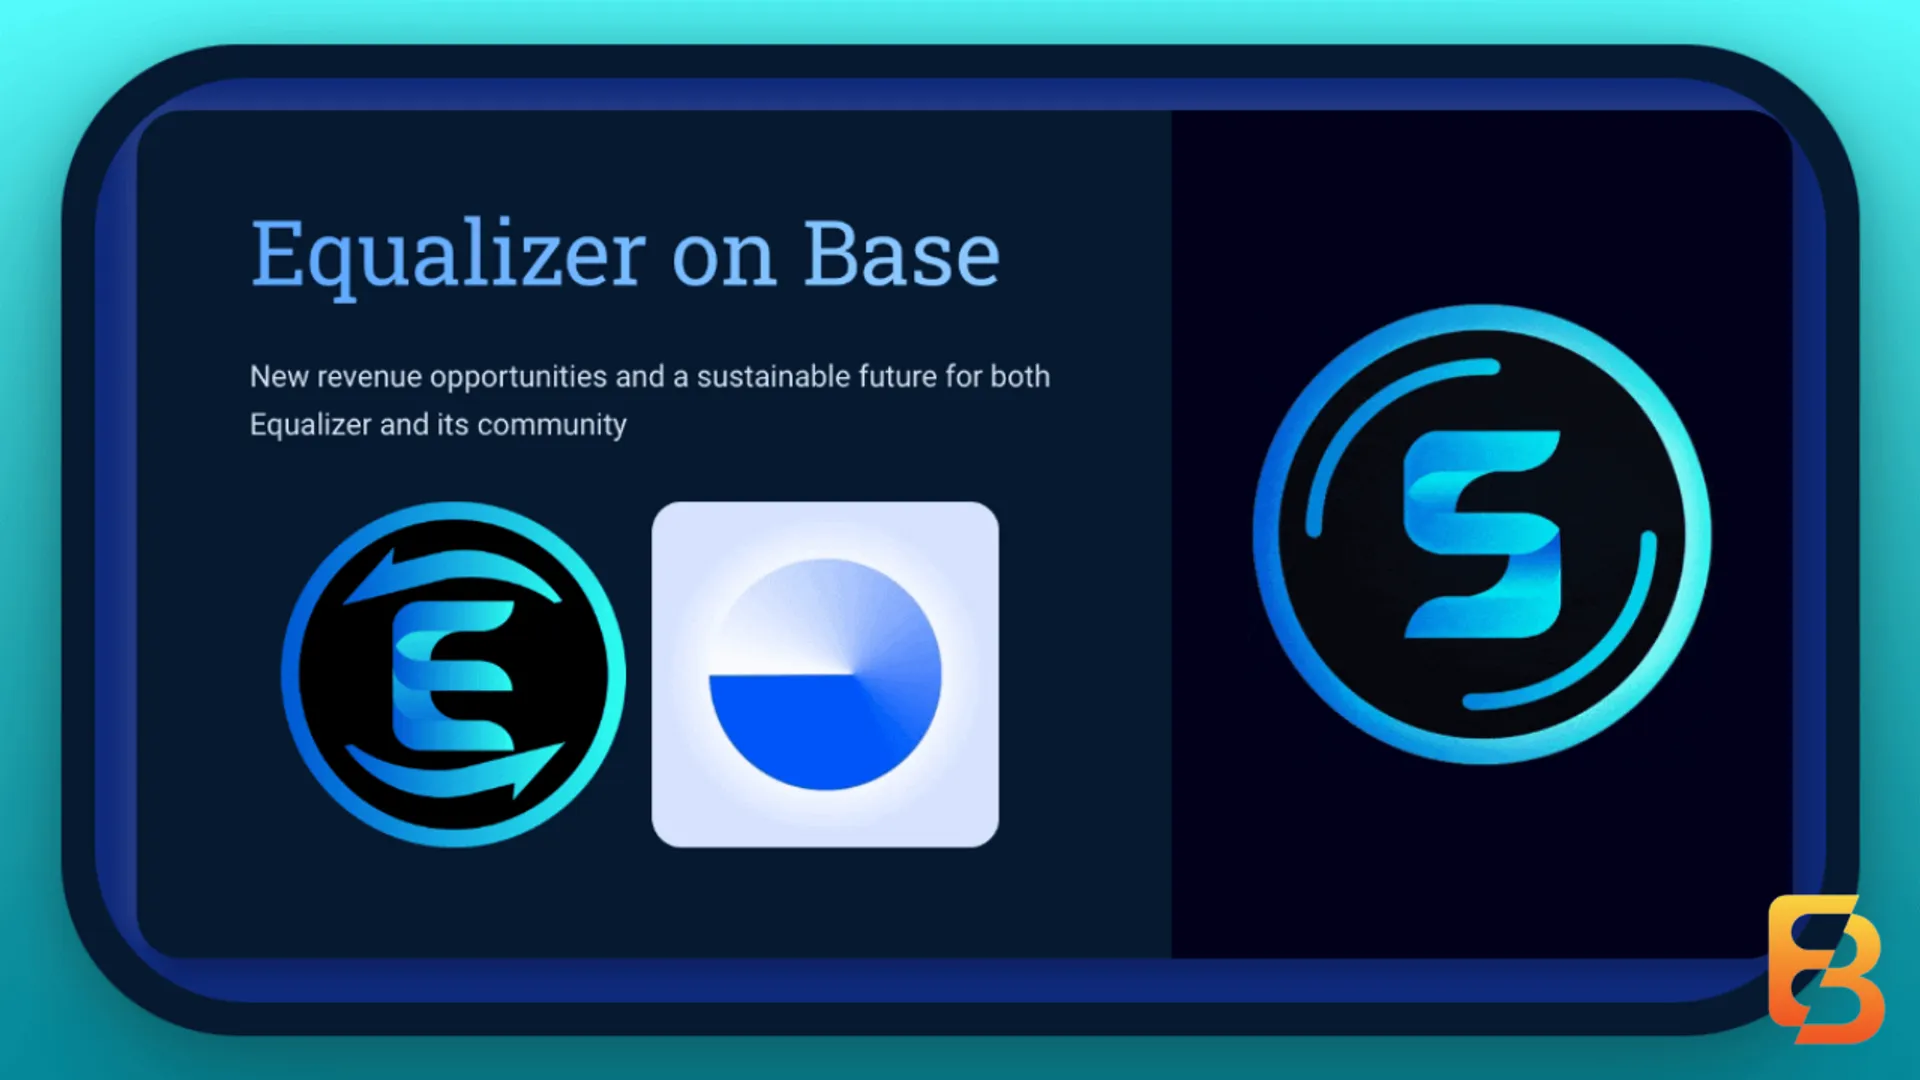 Equalizer is launching on @BuildOnBase

This expansion aims to unlock new revenue opportunities and create a sustainable future for both @Equalizer0x and the community 

So, what exactly does this mean for you? Let's find out through these slides

https://x.com/EverythingB0x/status/1703124127706652865?s=20

